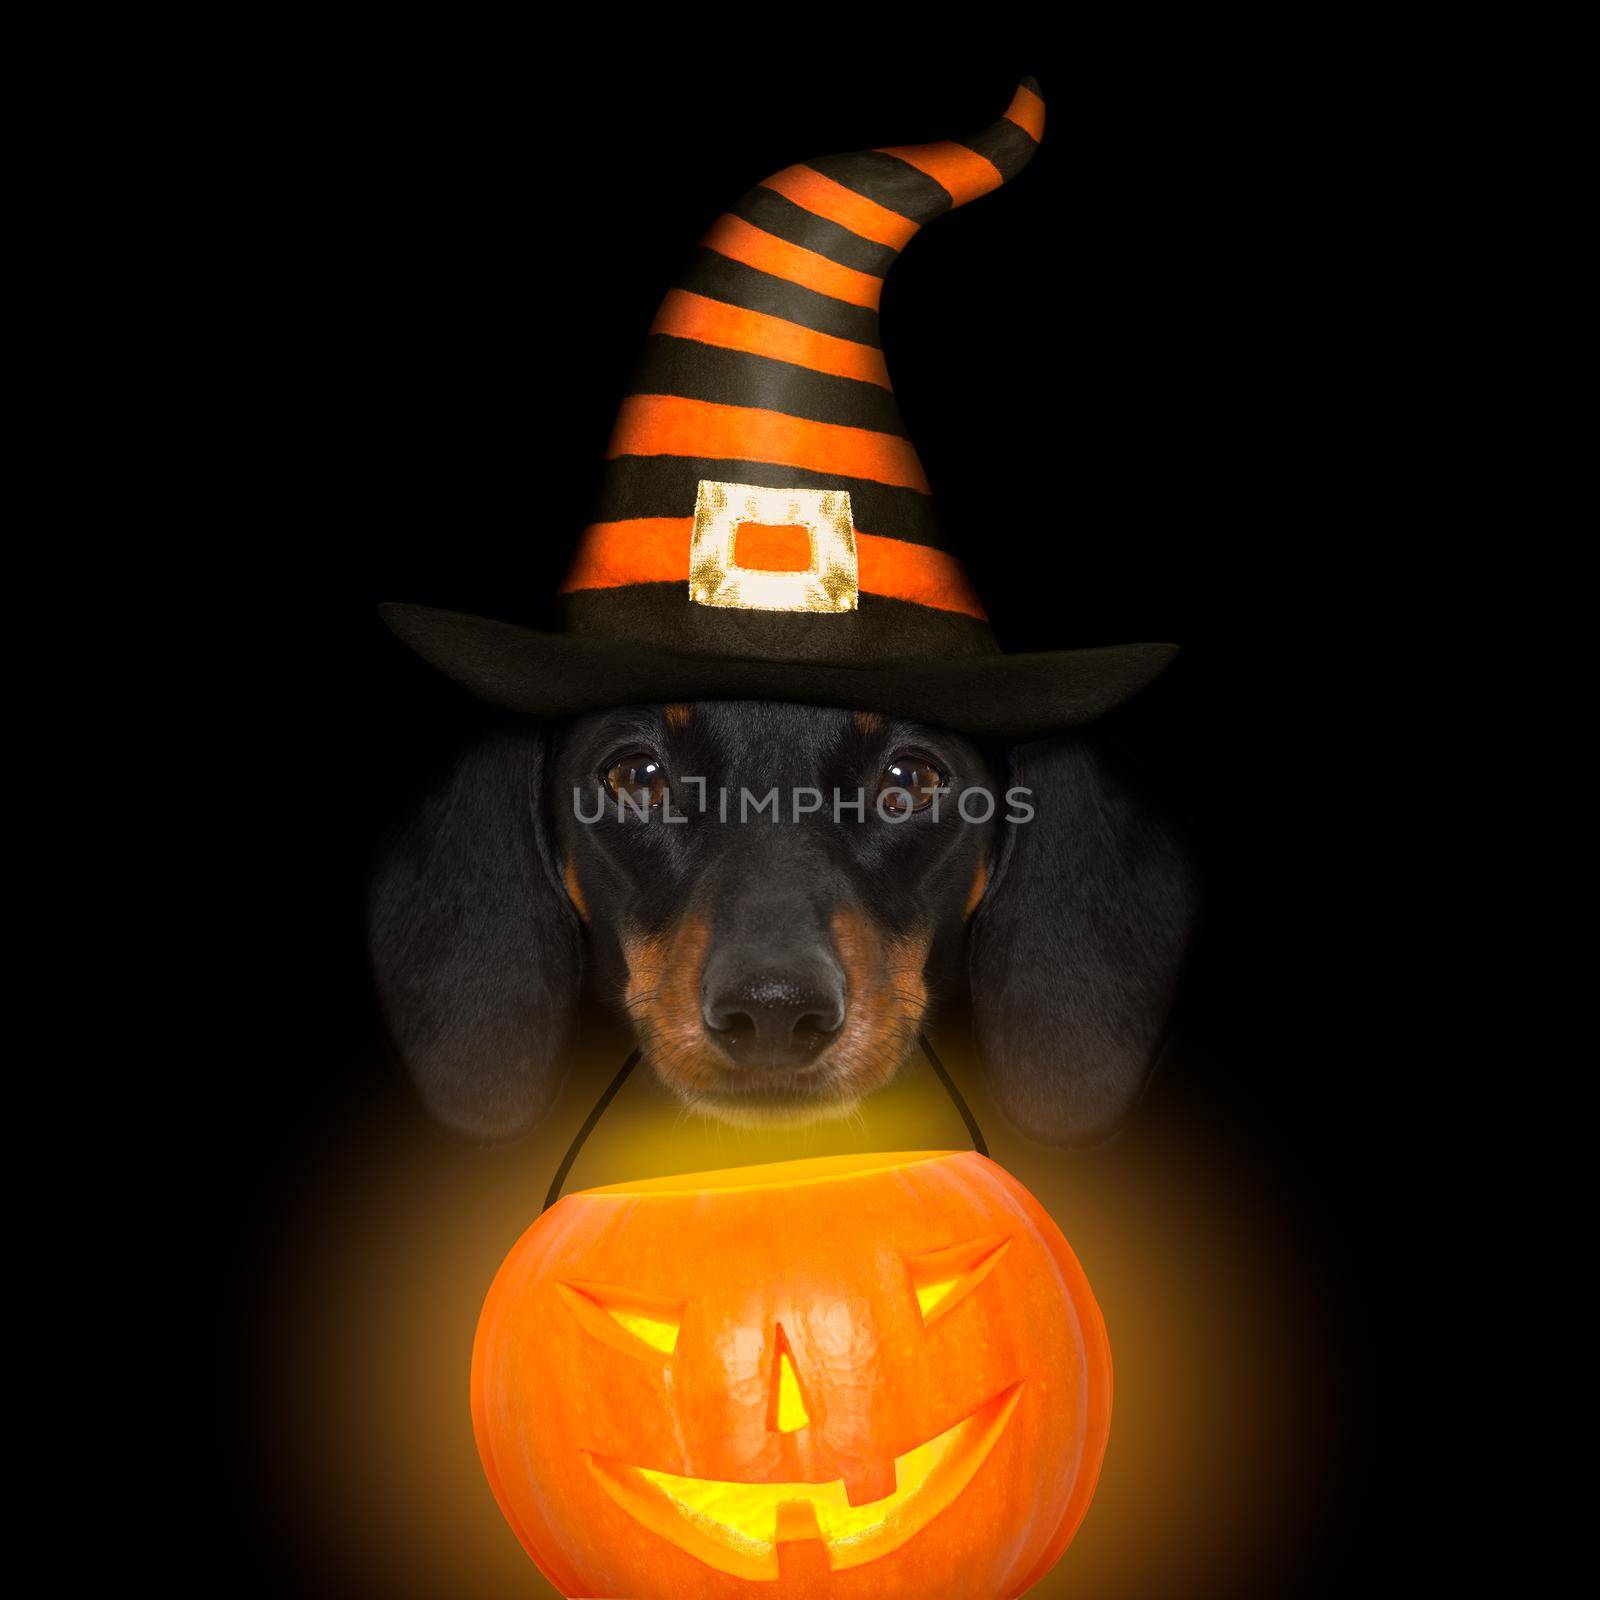 halloween devil sausage dachshund  scared and frightened, isolated on black background, holding a pumpkin lantern